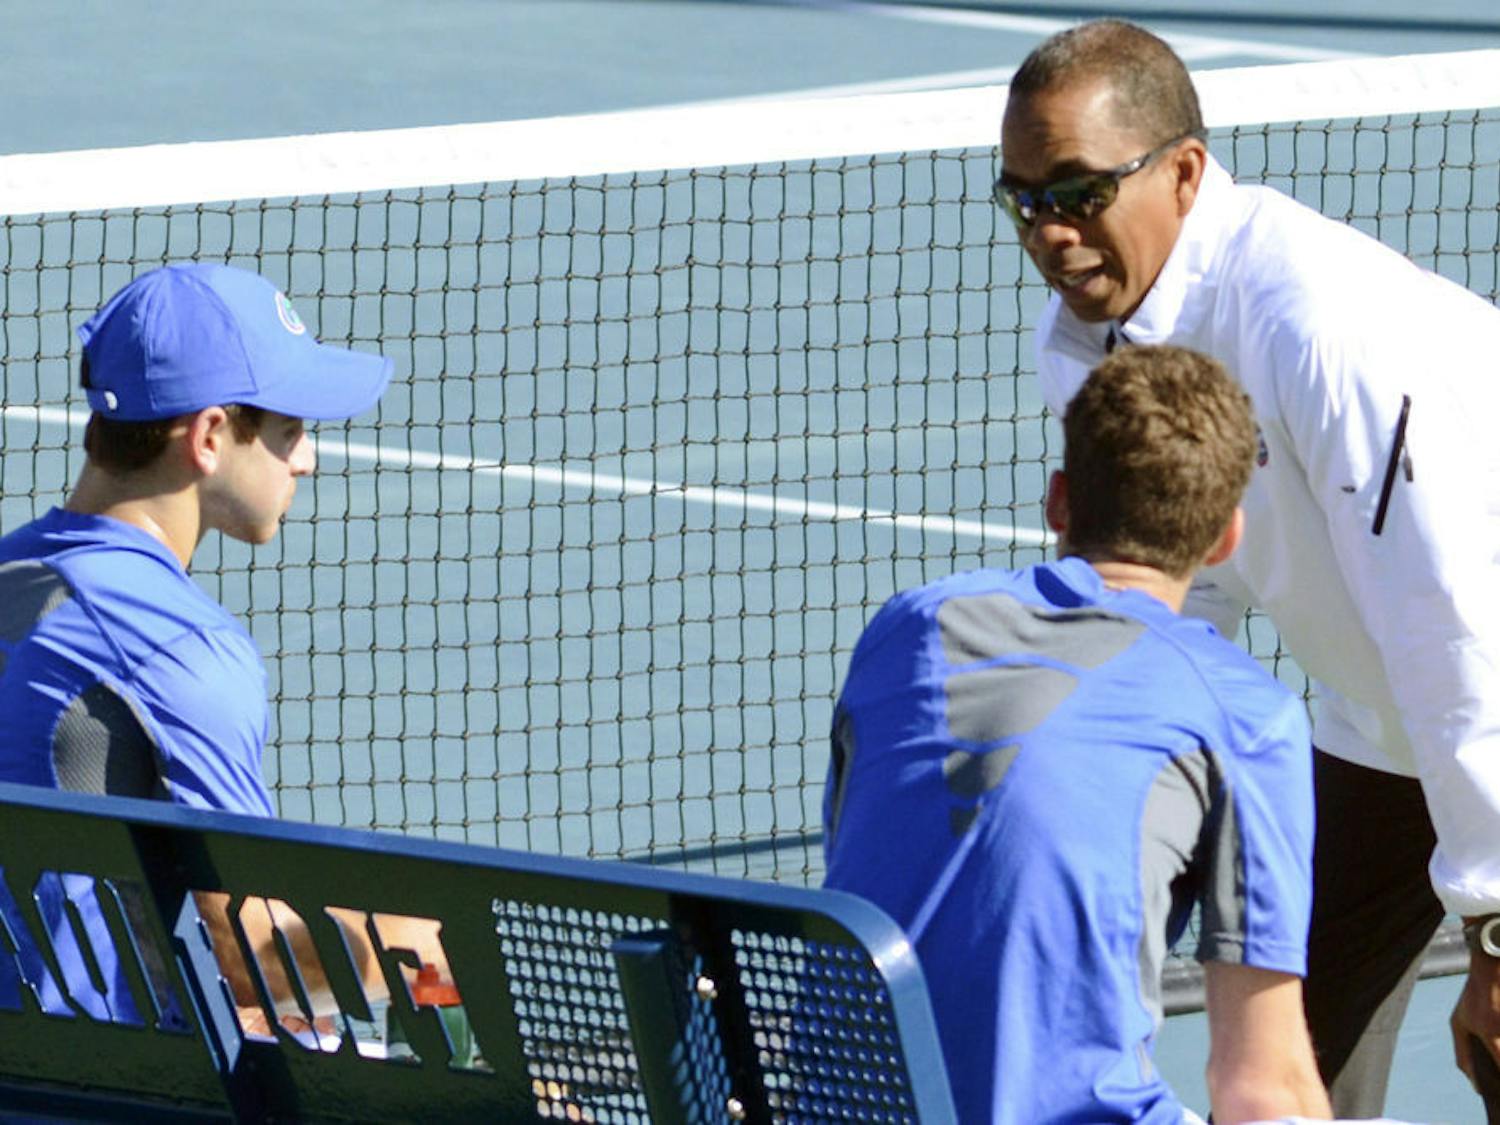 Coach Bryan Shelton talks with sophomores Elliott Orkin and Maxx Lipman during Florida's 9-3 win against William &amp; Mary on Jan. 10 at the Ring Tennis Complex.